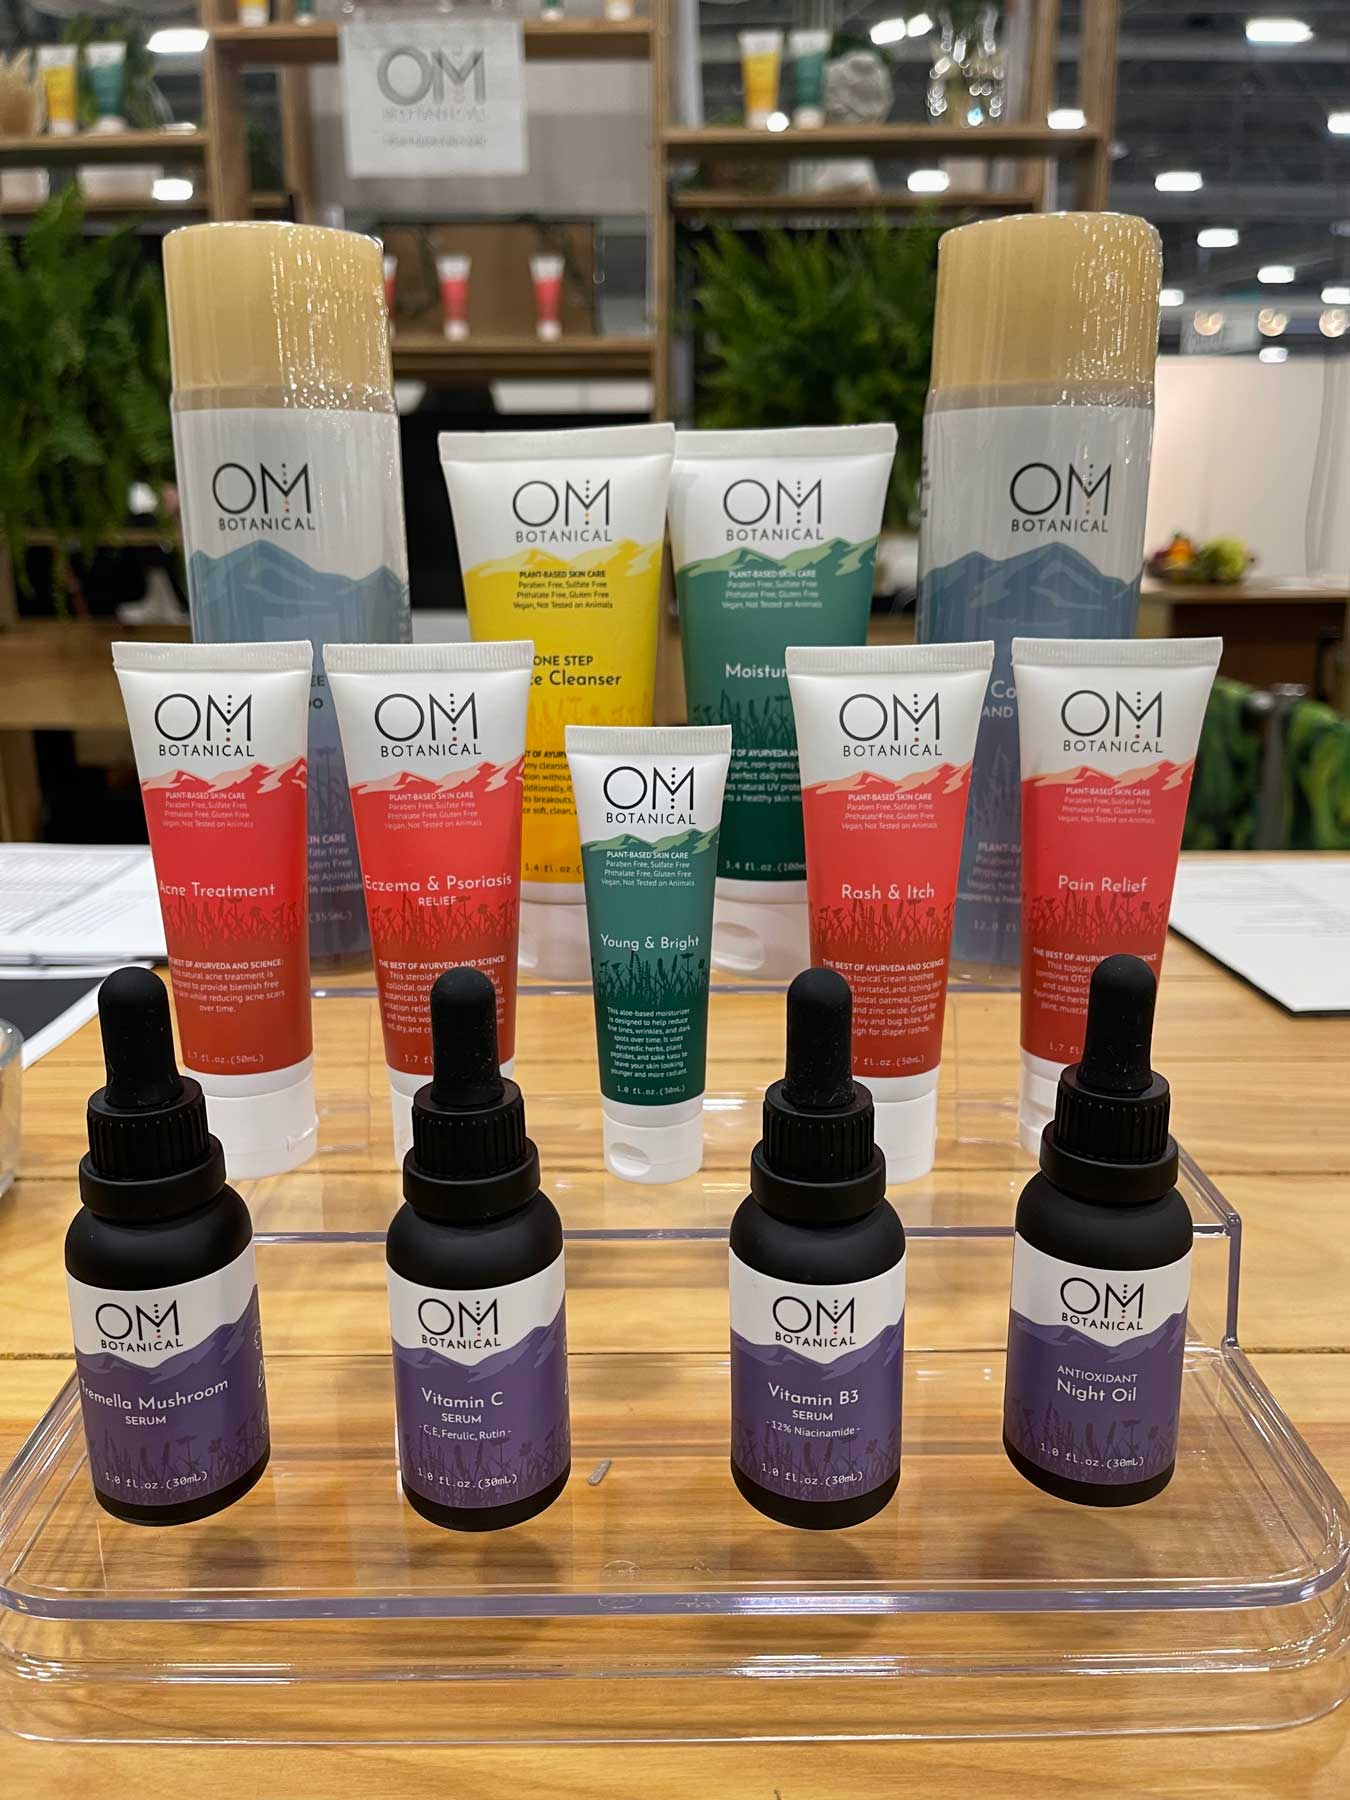 Maillot de bain Well-organized Natural Skin Care Mark OM Botanical Disrupts the Exchange Norms at The Expo East in Philadelphia, PA